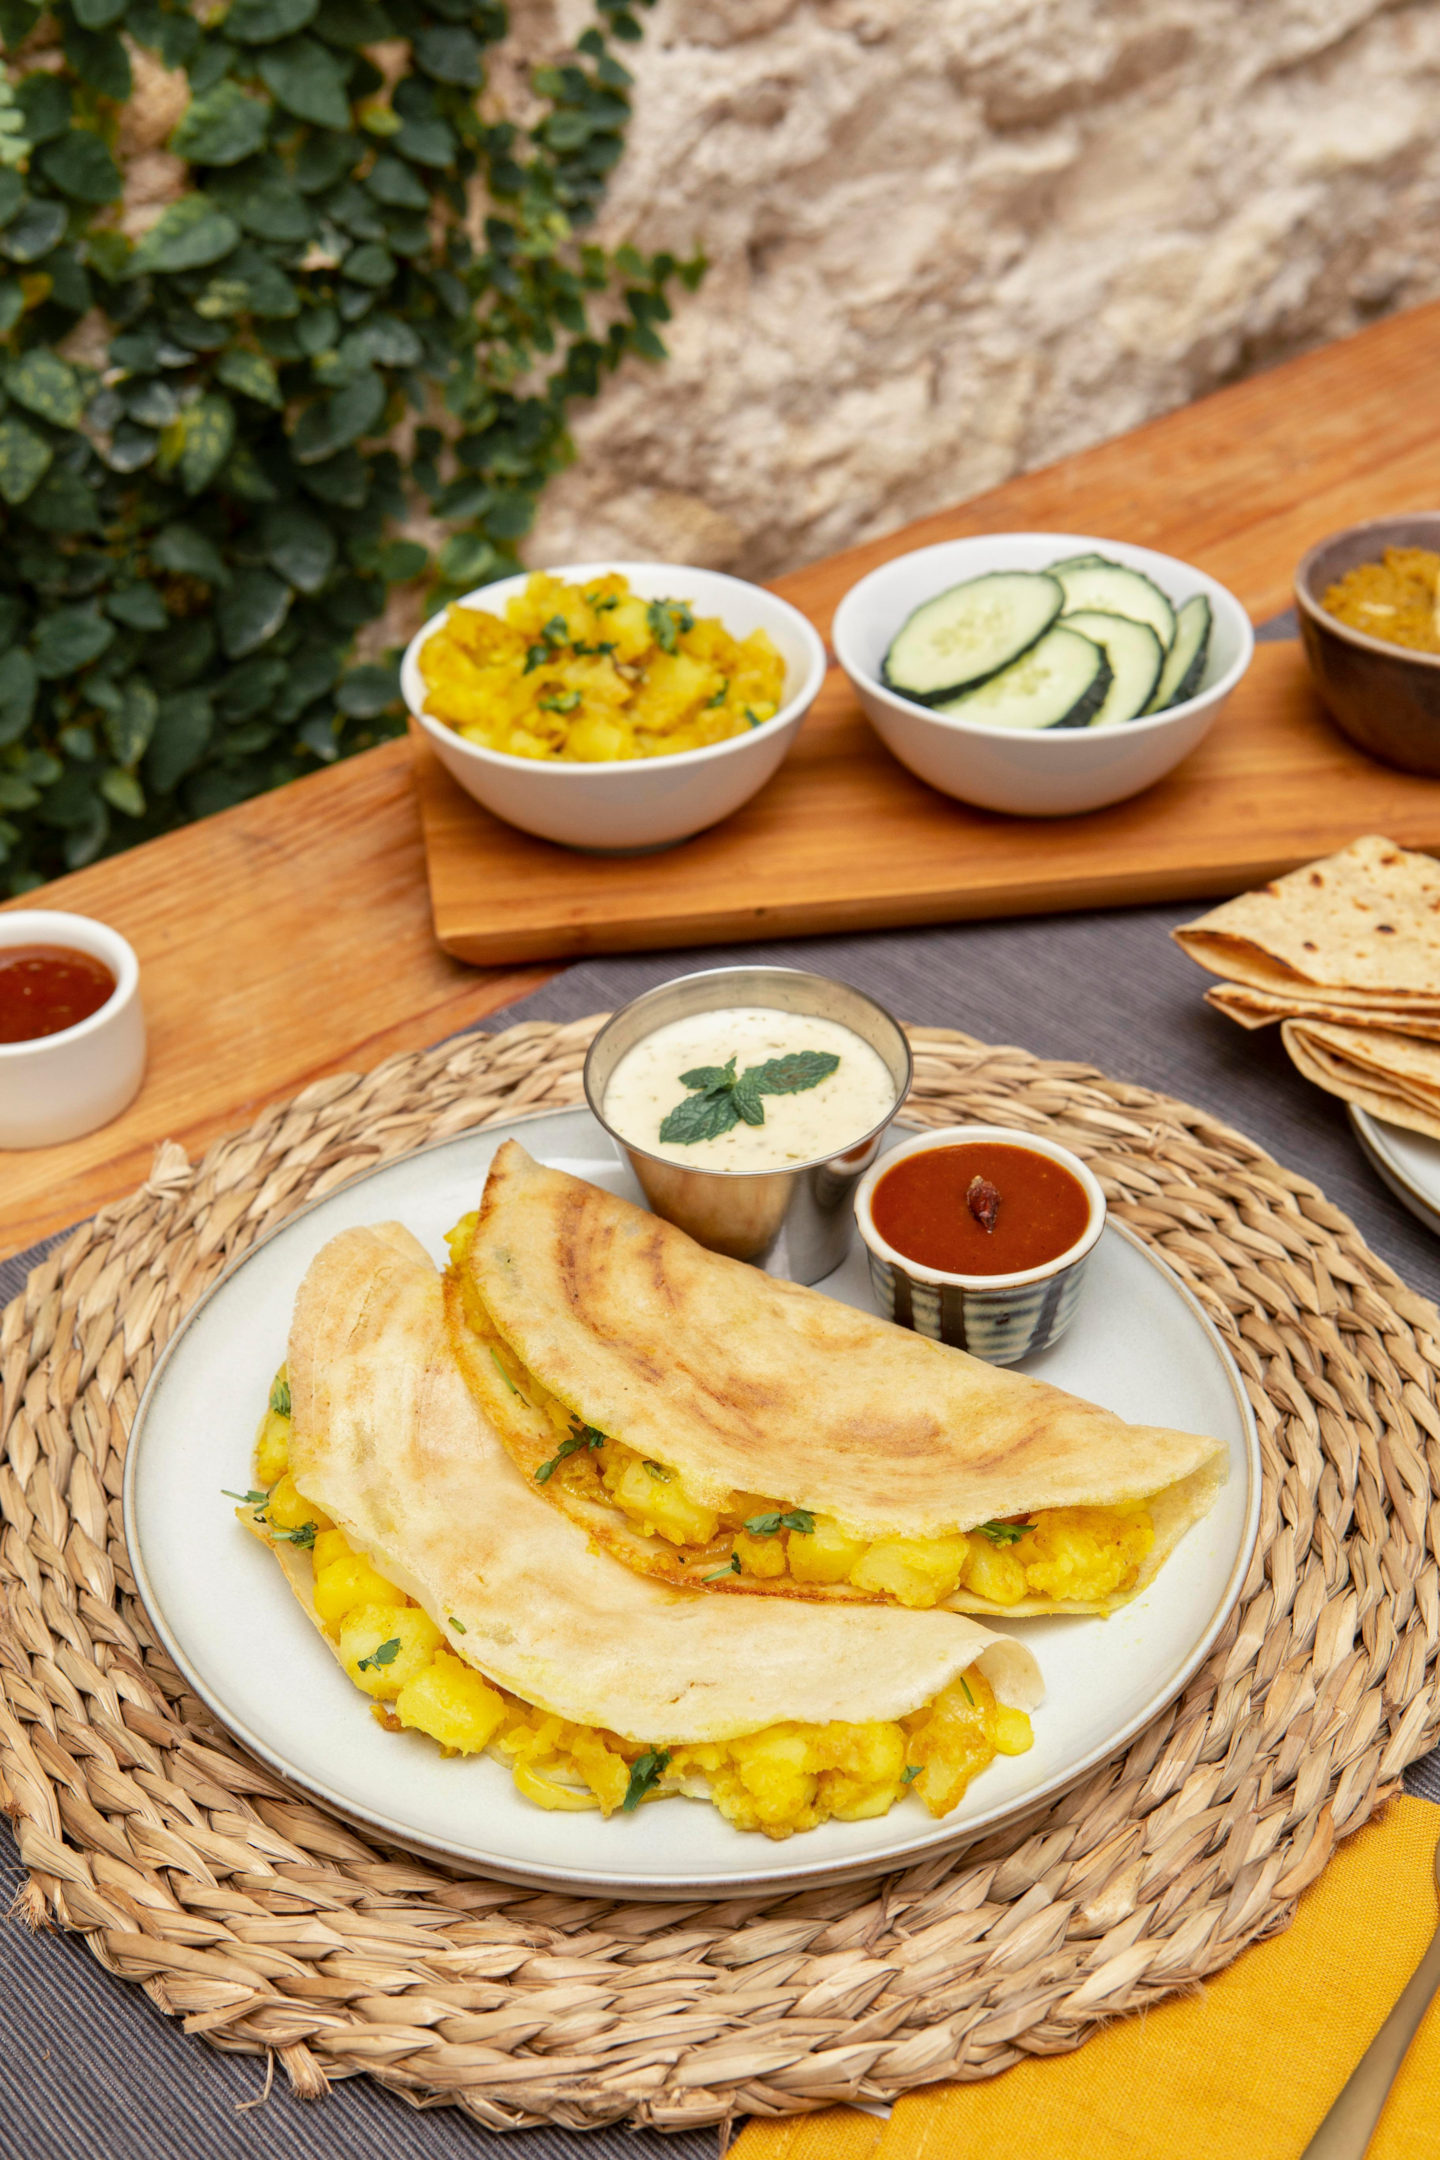 Delicious South Indian masala dosa served with chutney and sambar, perfect vegetarian breakfast or snack option